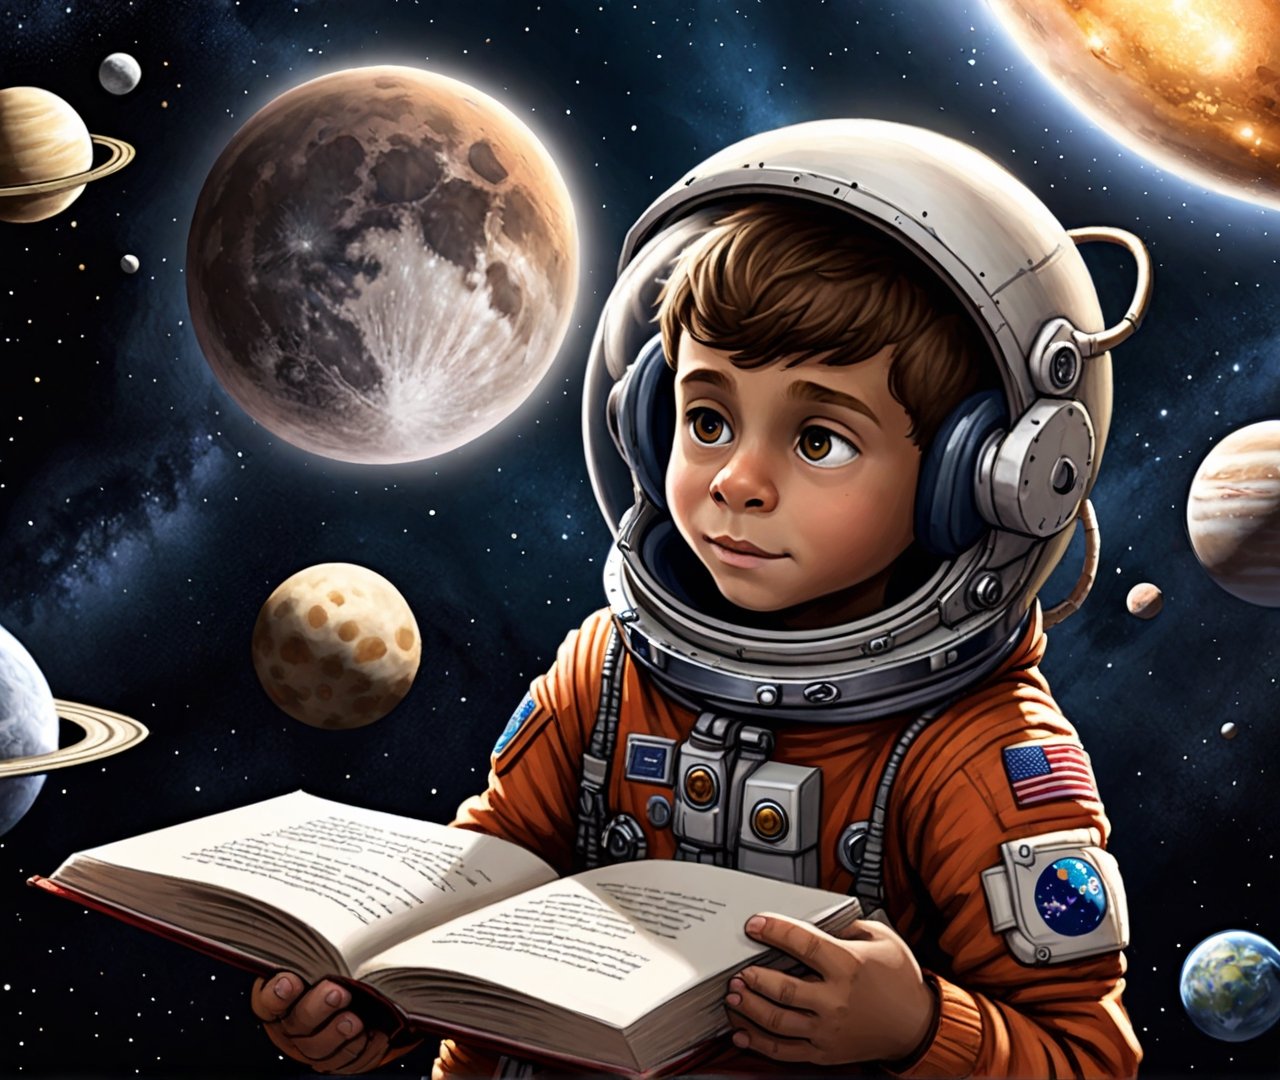 
I NEED YOU TO CREATE IMAGES FOR A 10-PAGE BOOK ABOUT A BOY IN SPACE
